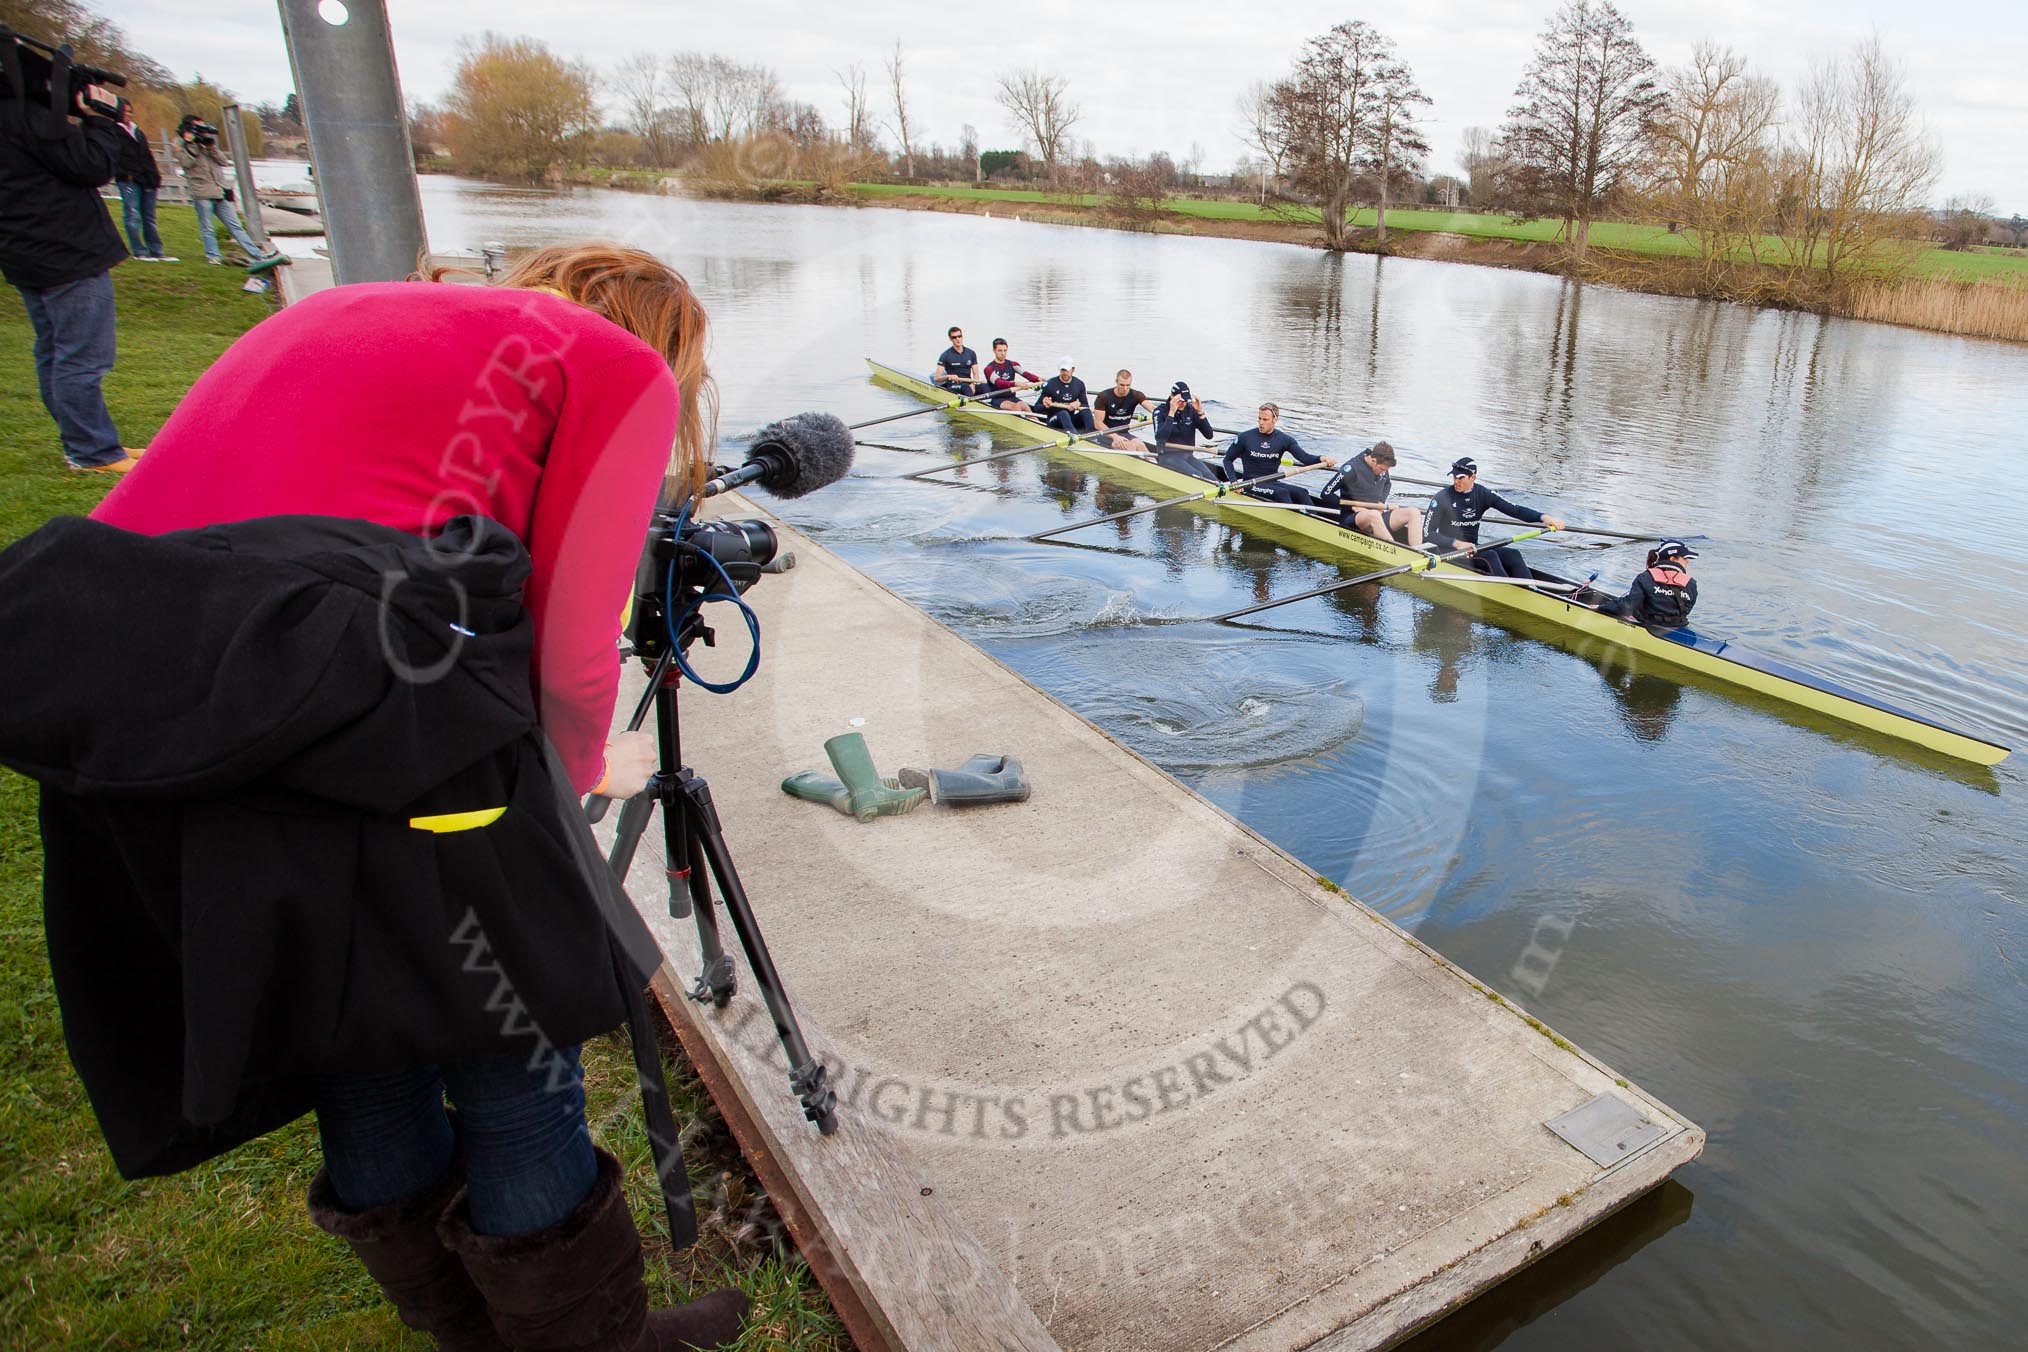 The Boat Race season 2012 - OUBC training: In front producer/director Hannah Madsen of www.AngelSharp.com, working on a fabulous behind-the scenes video about The Boat Race. Behind her Chinese and Brazilian television cameramen, on the river  the OUBC Eight..


Oxfordshire,
United Kingdom,
on 20 March 2012 at 15:01, image #18